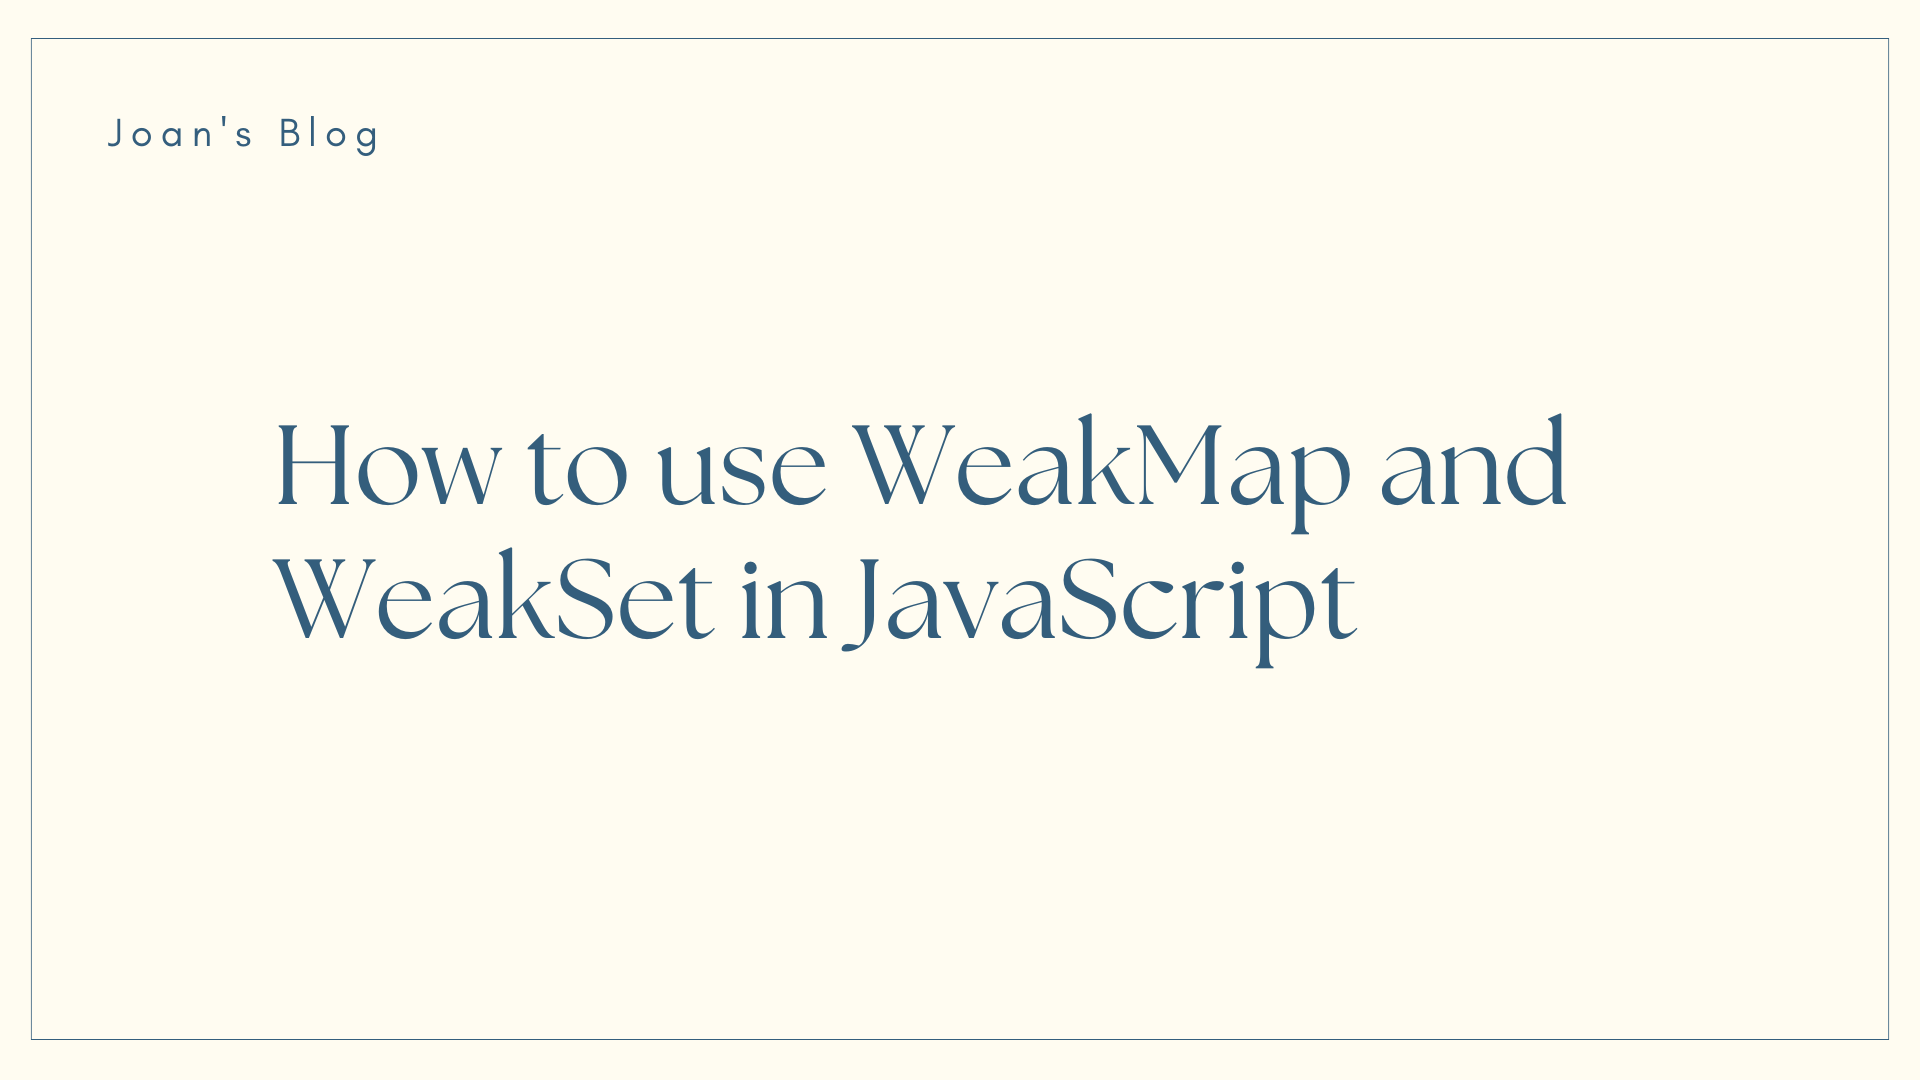 How to Use WeakMap and WeakSet in JavaScript